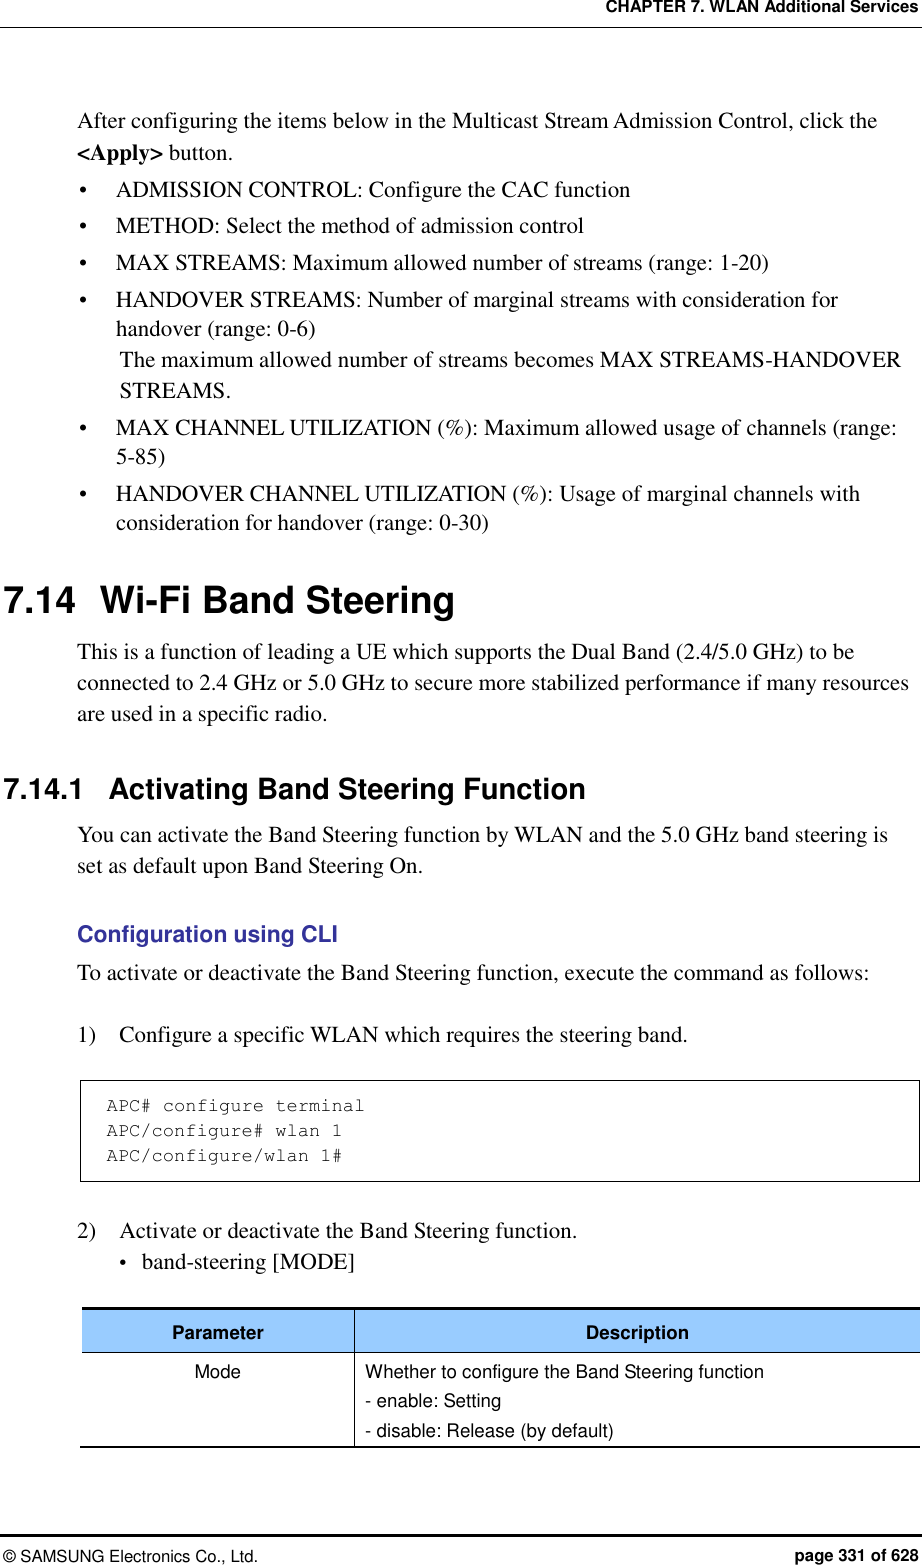 CHAPTER 7. WLAN Additional Services ©  SAMSUNG Electronics Co., Ltd.  page 331 of 628 After configuring the items below in the Multicast Stream Admission Control, click the &lt;Apply&gt; button.  ADMISSION CONTROL: Configure the CAC function  METHOD: Select the method of admission control  MAX STREAMS: Maximum allowed number of streams (range: 1-20)  HANDOVER STREAMS: Number of marginal streams with consideration for handover (range: 0-6) The maximum allowed number of streams becomes MAX STREAMS-HANDOVER STREAMS.  MAX CHANNEL UTILIZATION (%): Maximum allowed usage of channels (range: 5-85)  HANDOVER CHANNEL UTILIZATION (%): Usage of marginal channels with consideration for handover (range: 0-30)  7.14  Wi-Fi Band Steering This is a function of leading a UE which supports the Dual Band (2.4/5.0 GHz) to be connected to 2.4 GHz or 5.0 GHz to secure more stabilized performance if many resources are used in a specific radio.  7.14.1  Activating Band Steering Function You can activate the Band Steering function by WLAN and the 5.0 GHz band steering is set as default upon Band Steering On.  Configuration using CLI To activate or deactivate the Band Steering function, execute the command as follows:  1)    Configure a specific WLAN which requires the steering band.  APC# configure terminal APC/configure# wlan 1 APC/configure/wlan 1#  2)    Activate or deactivate the Band Steering function.  band-steering [MODE]  Parameter Description Mode Whether to configure the Band Steering function - enable: Setting - disable: Release (by default)  